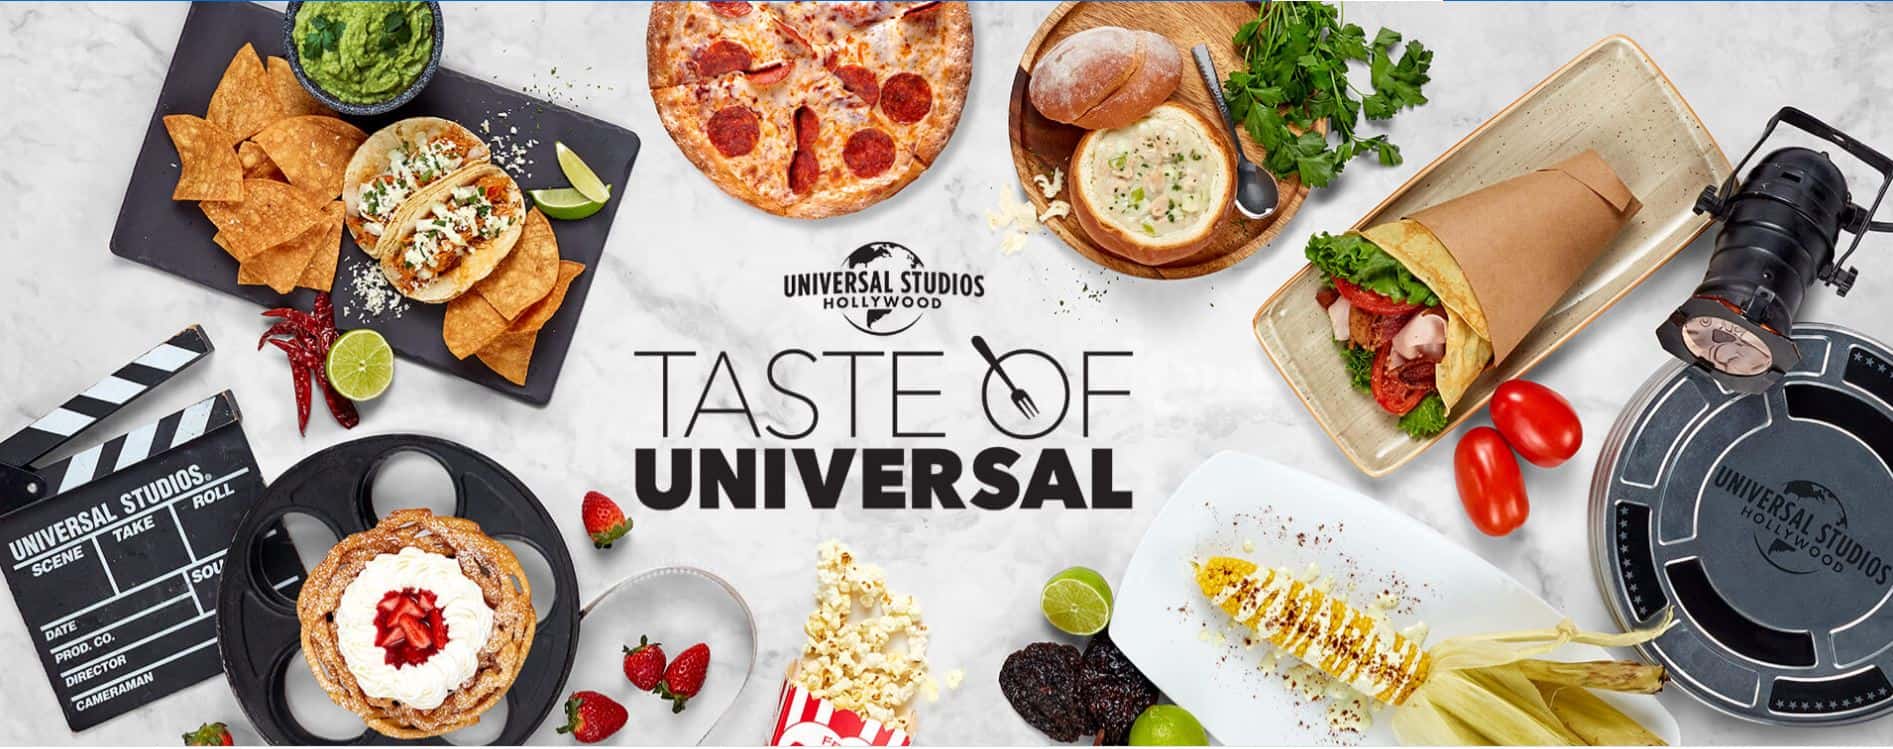 A Taste of Universal at Universal Studios Hollywood 1